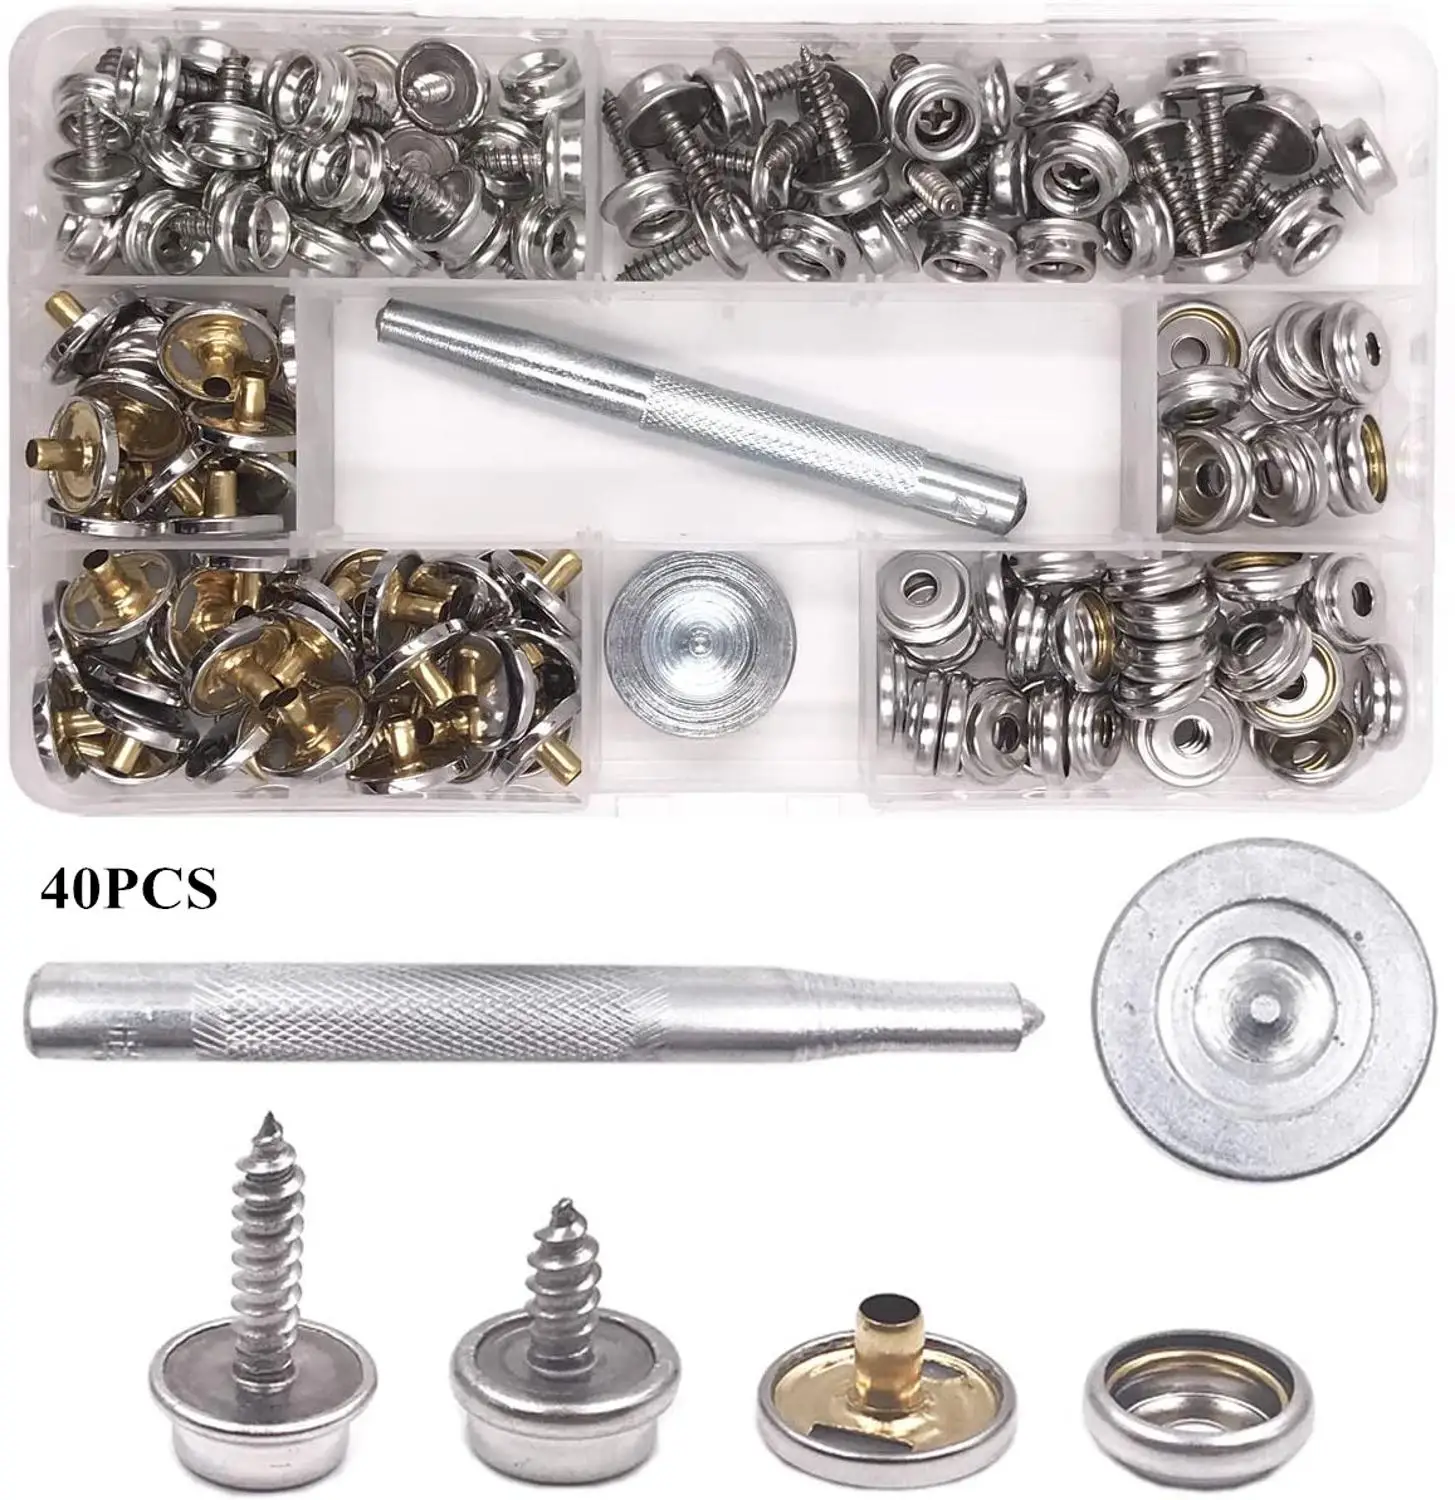 10 Set 3/8'' Stainless Steel Snap Button Screw Studs Canvas Tent Boat Covers 